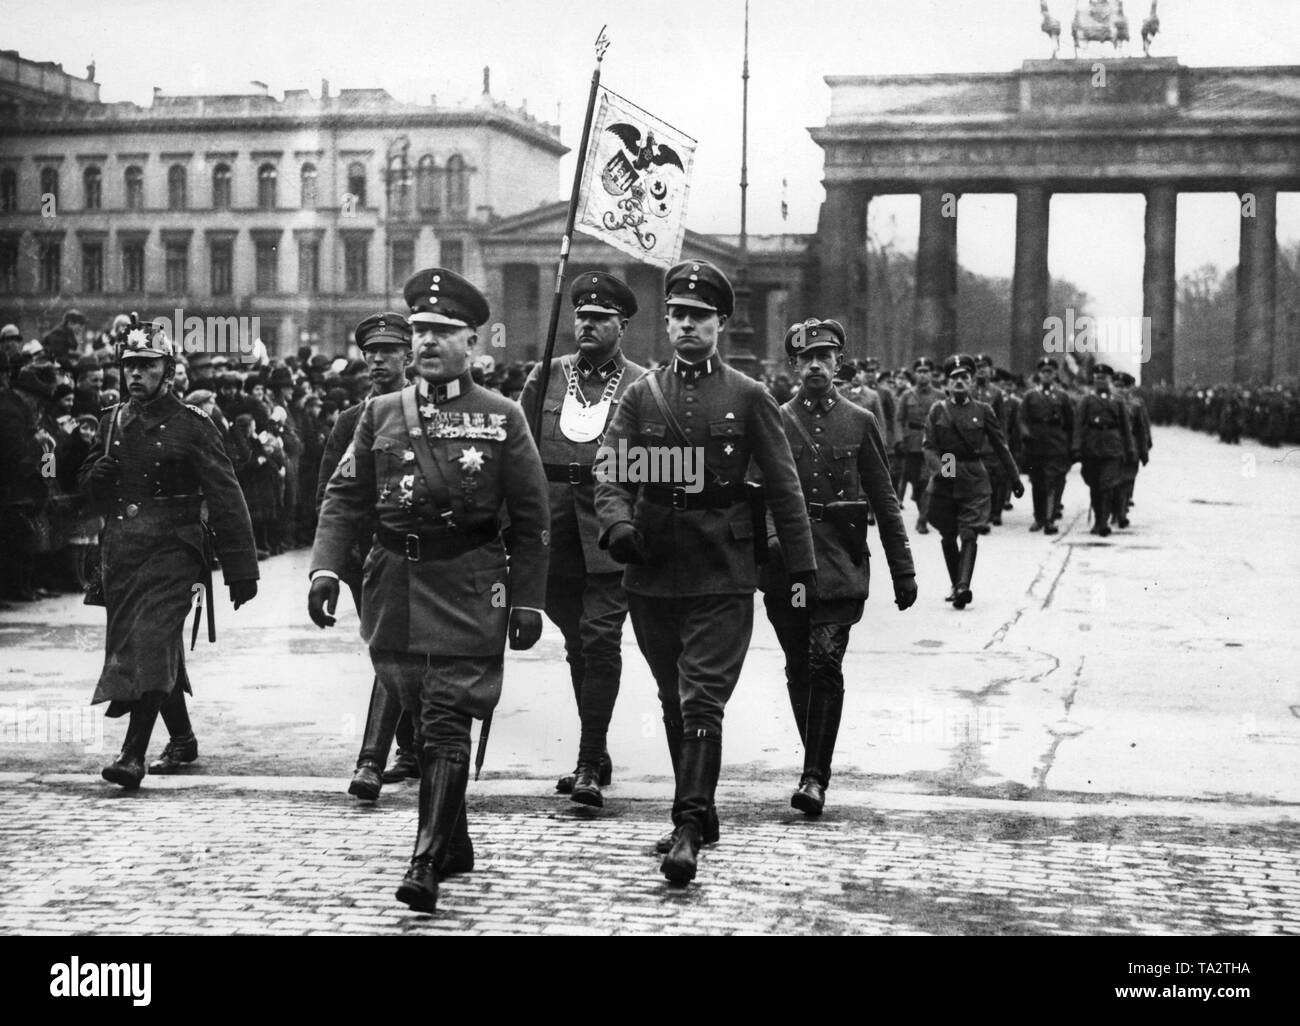 25,000 men of the 'Stahlhelm, Bund der Frontsoldaten' are marching to Schlossplatz from the Siegessaeule (Victory Column) through the Brandenburg Gate (photo) on the day of the Reichstag election in Berlin. In the front, Theodor Duesterberg, second leader of the Stahlhelm. On the left, a policeman. Stock Photo